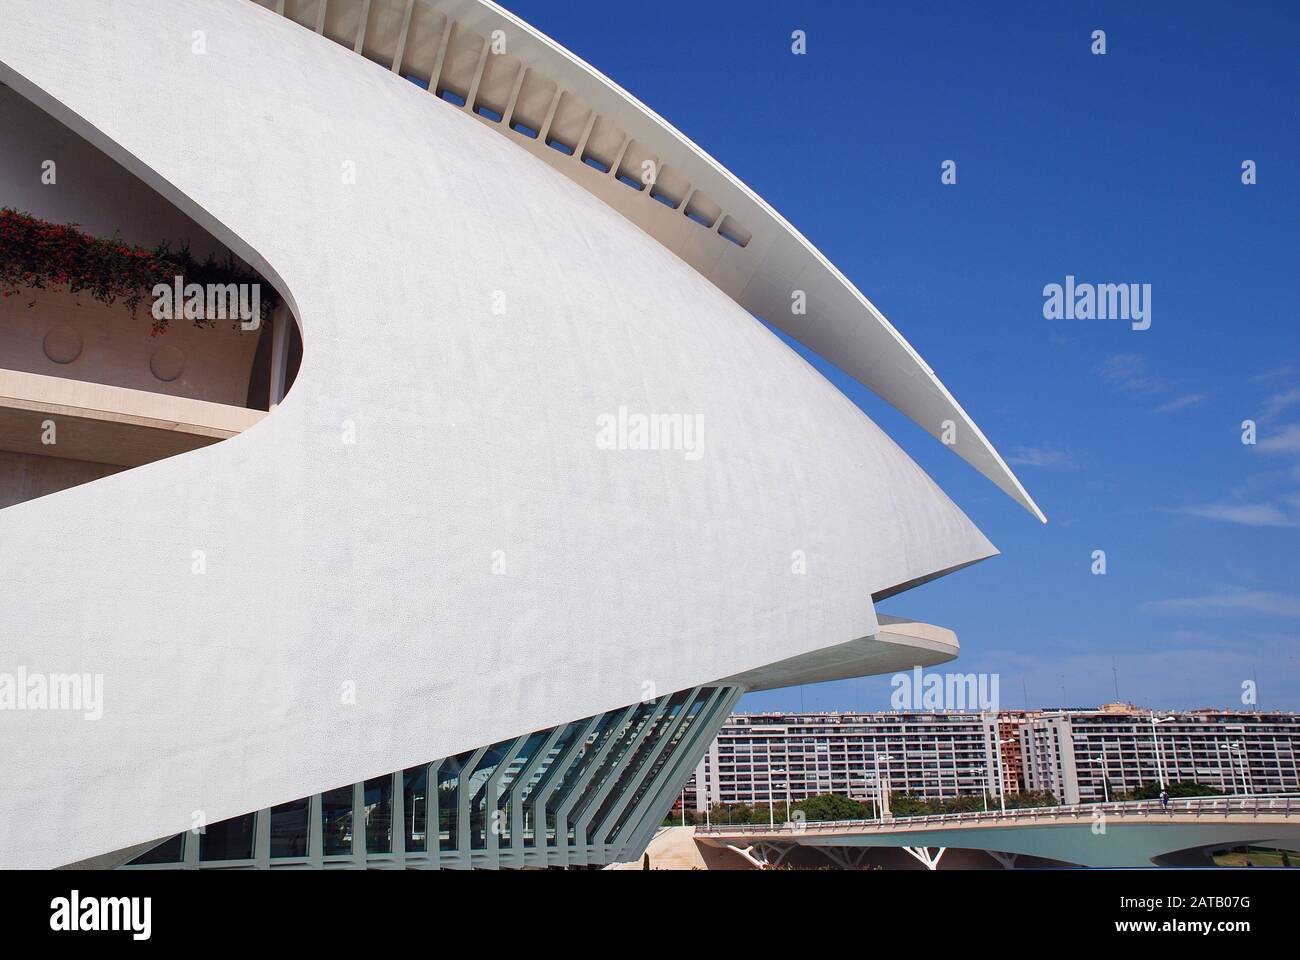 The Palau de les Arts Reina Sofia at the City of Arts and Sciences in Valencia, Spain on September 2, 2019. Stock Photo